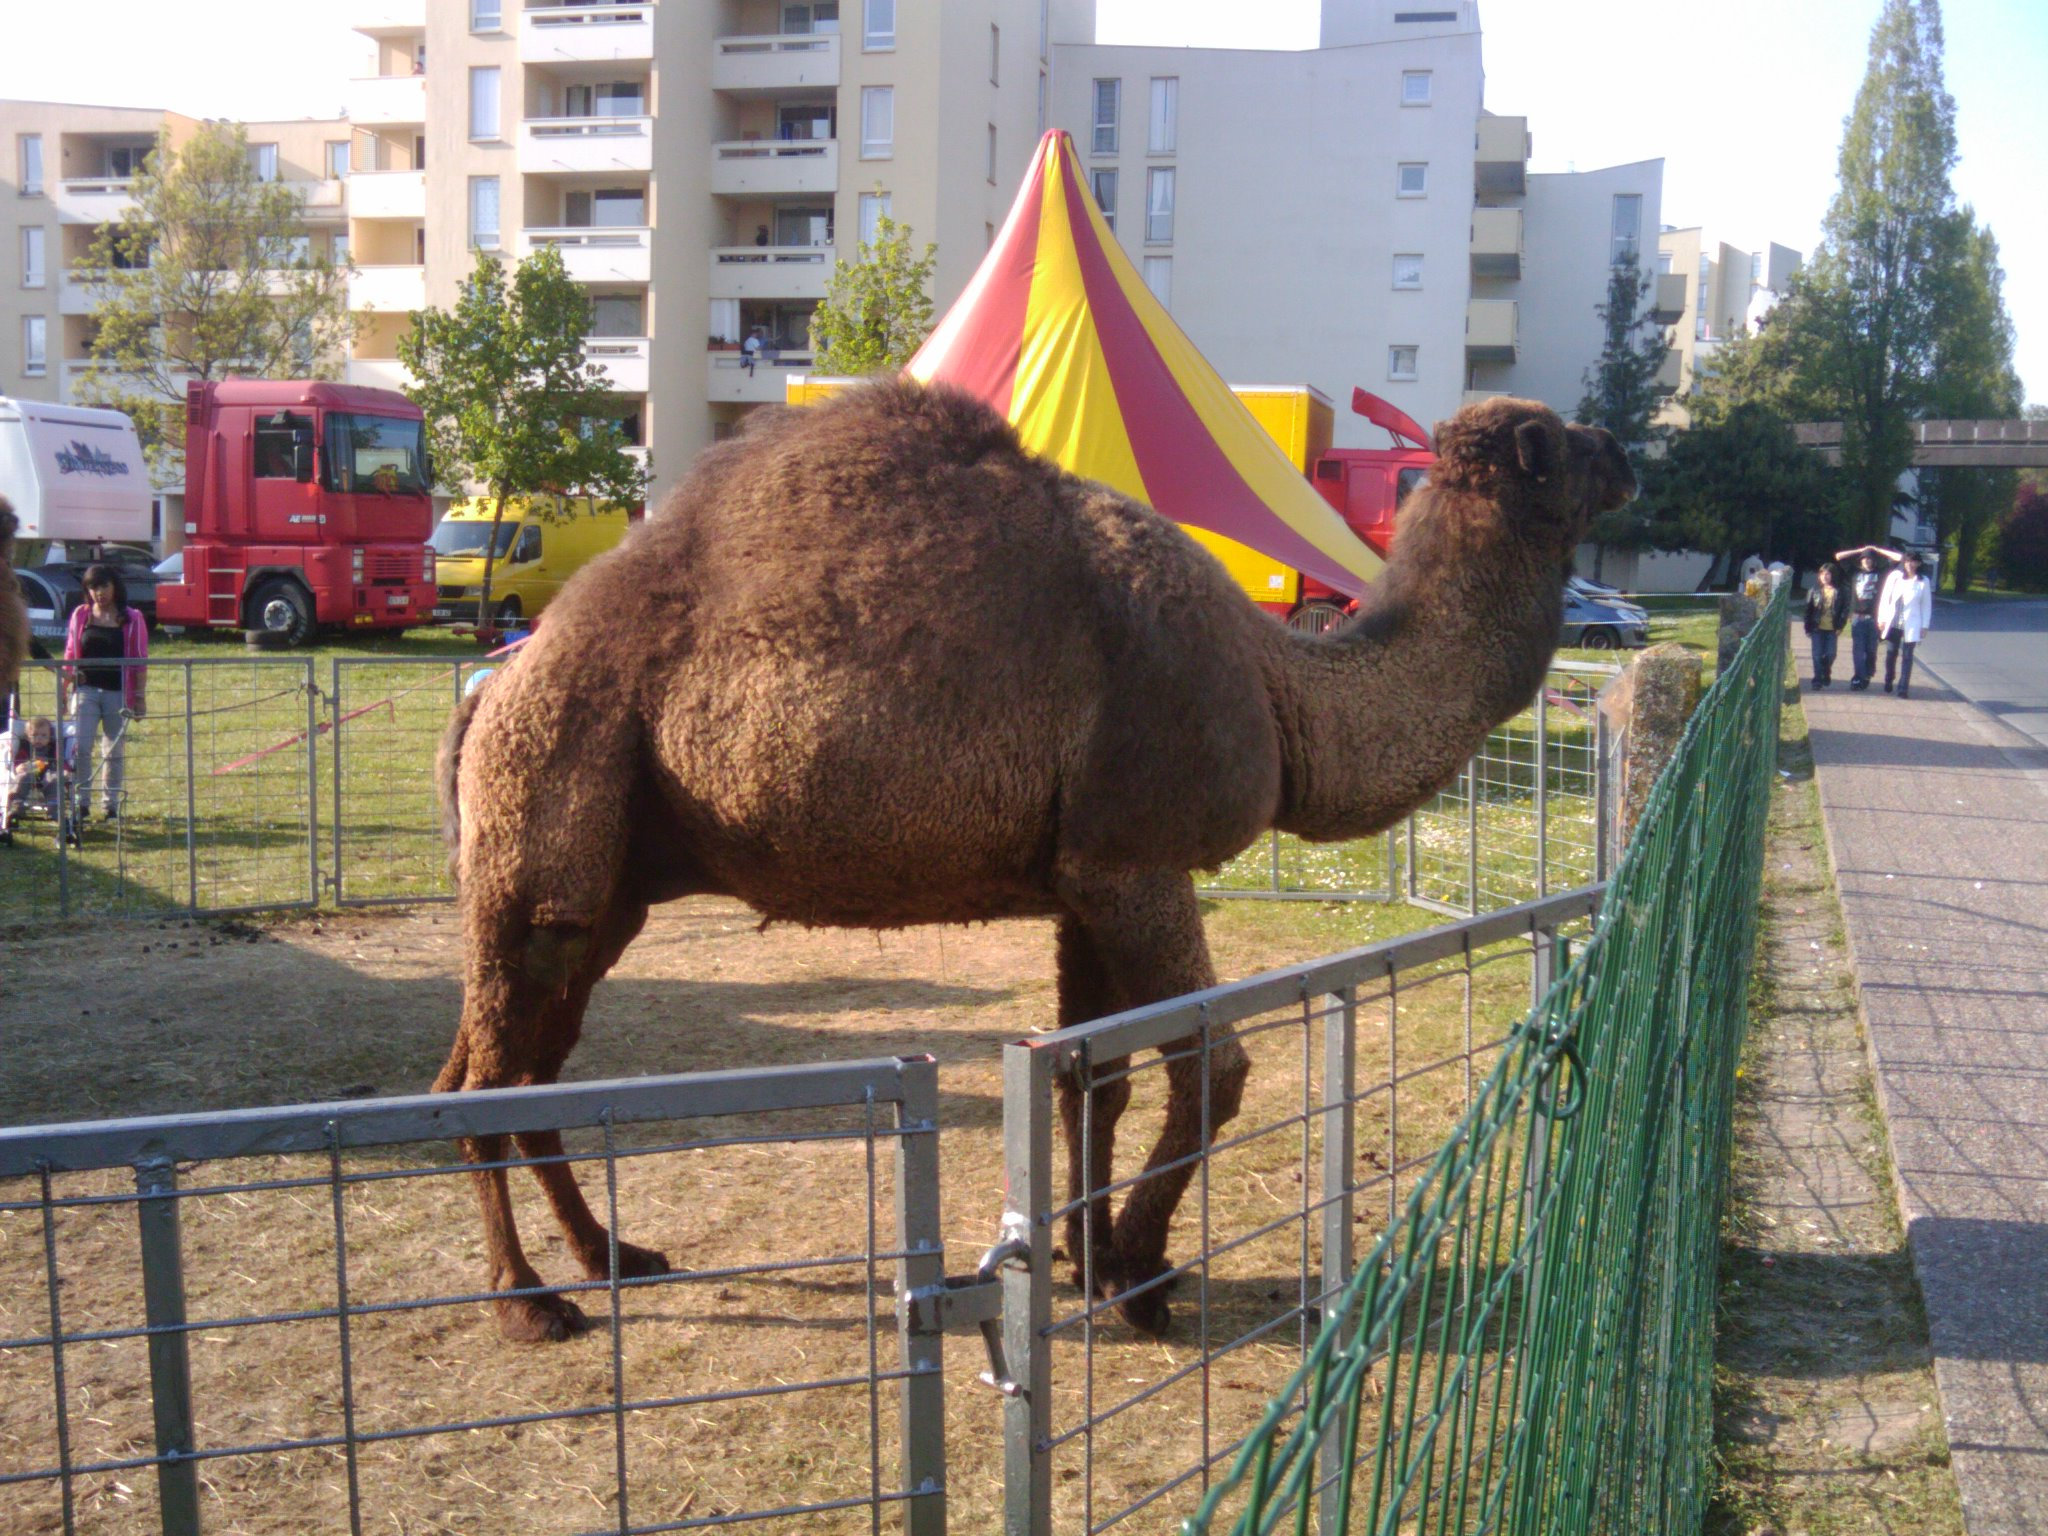 Camels from the Cirque de Bercy